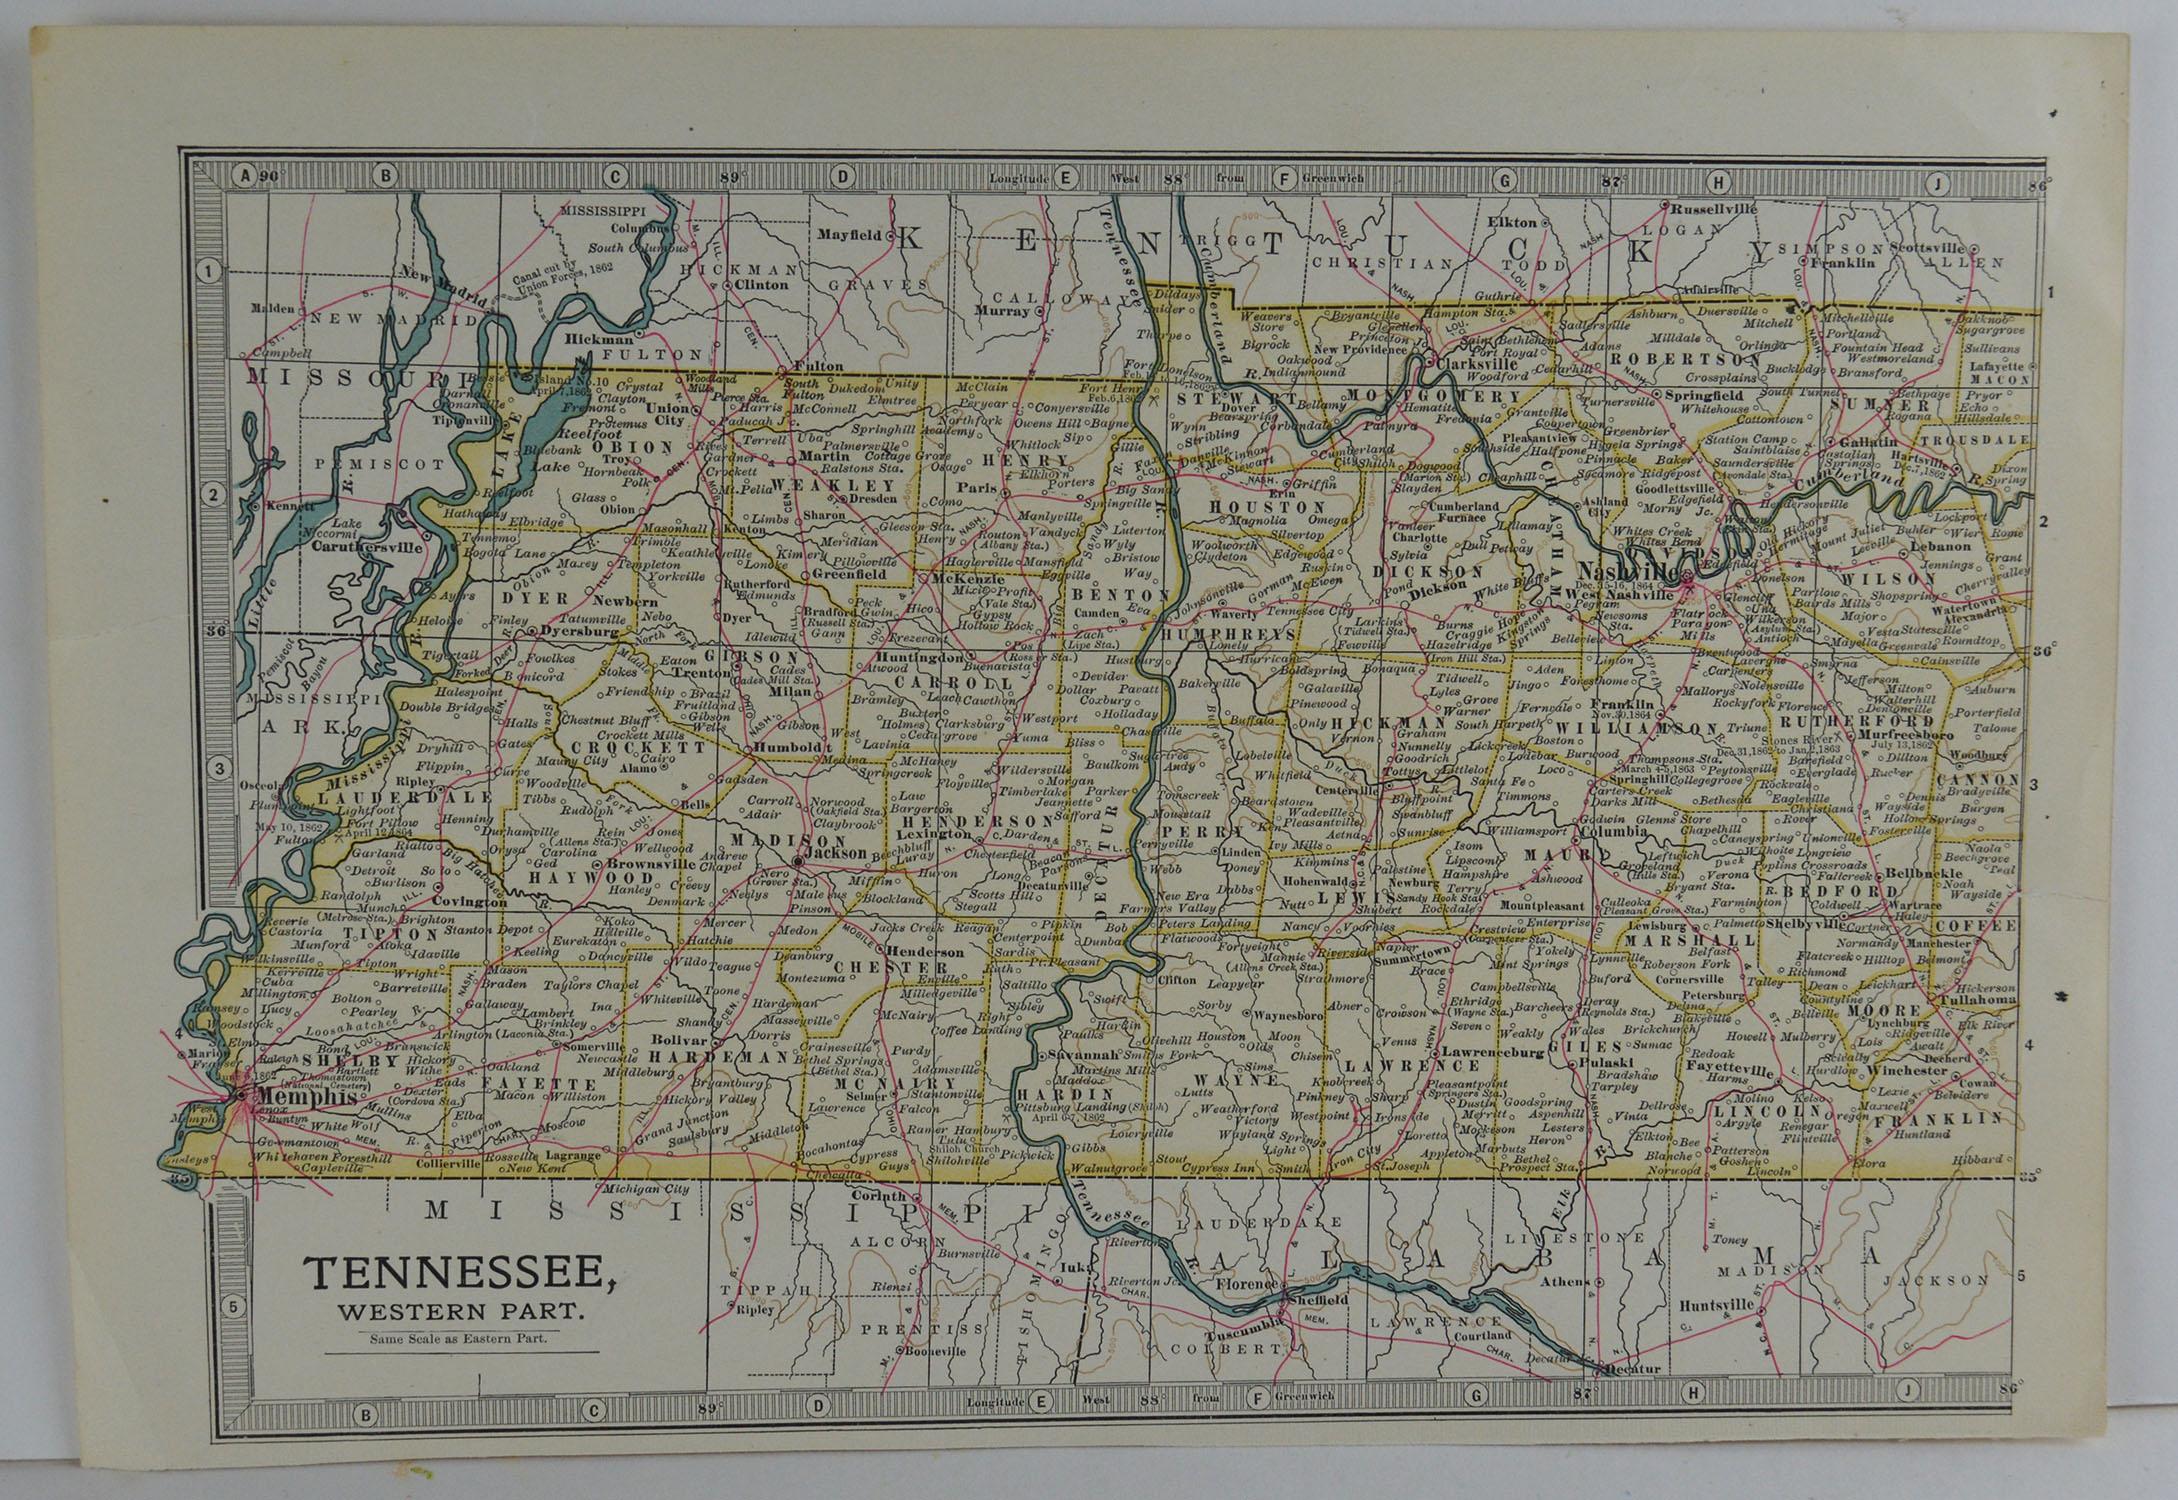 Other Original Antique Map of Tennessee, circa 1890